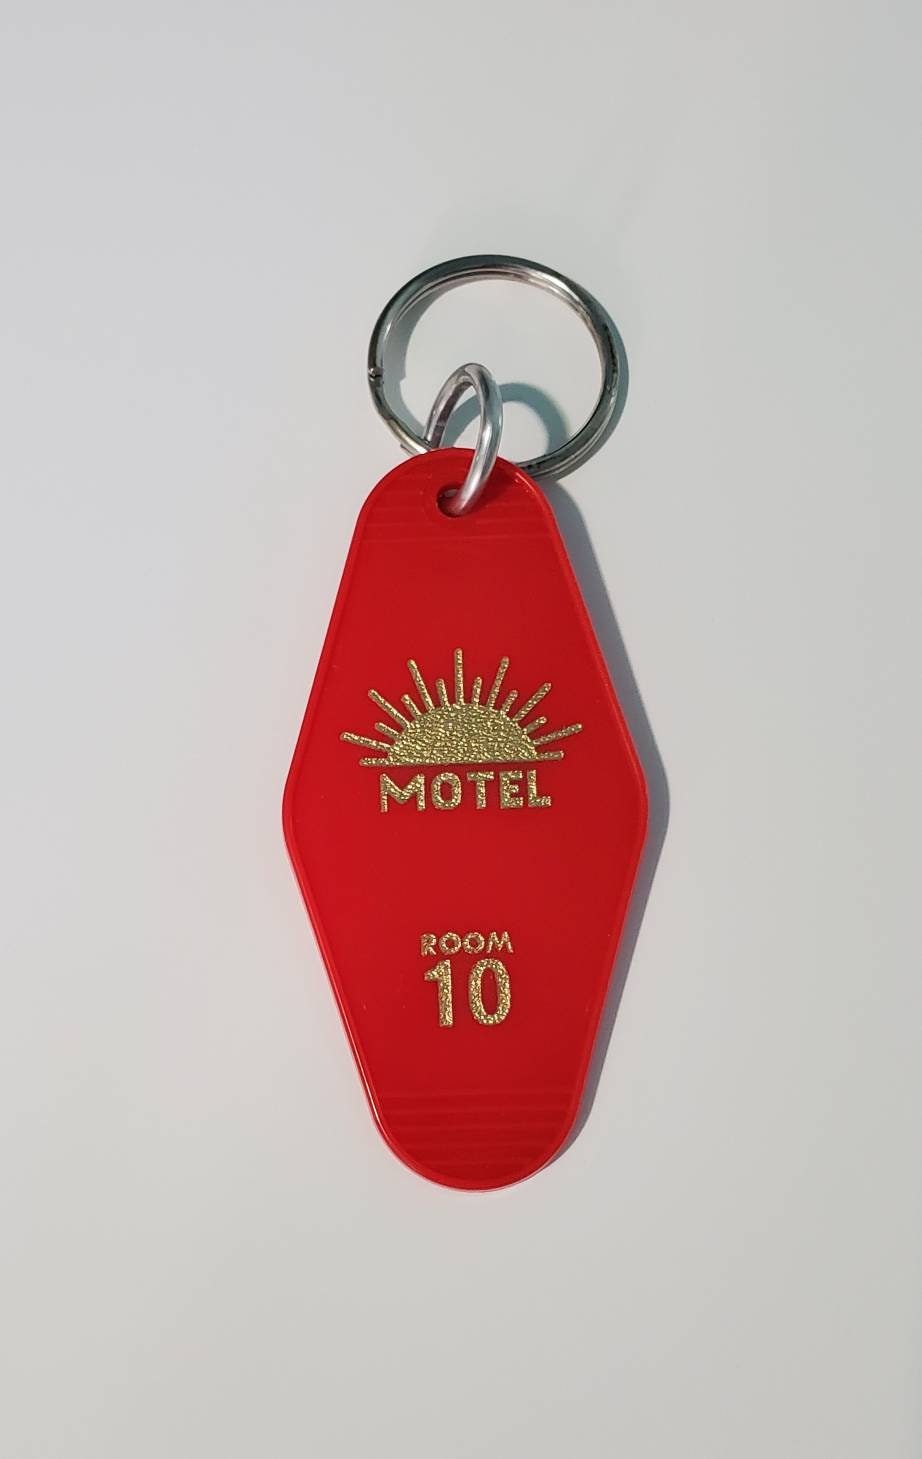 The Lost Room Inspired Object The Key Motel Room Key chain Lord and Lady Towers